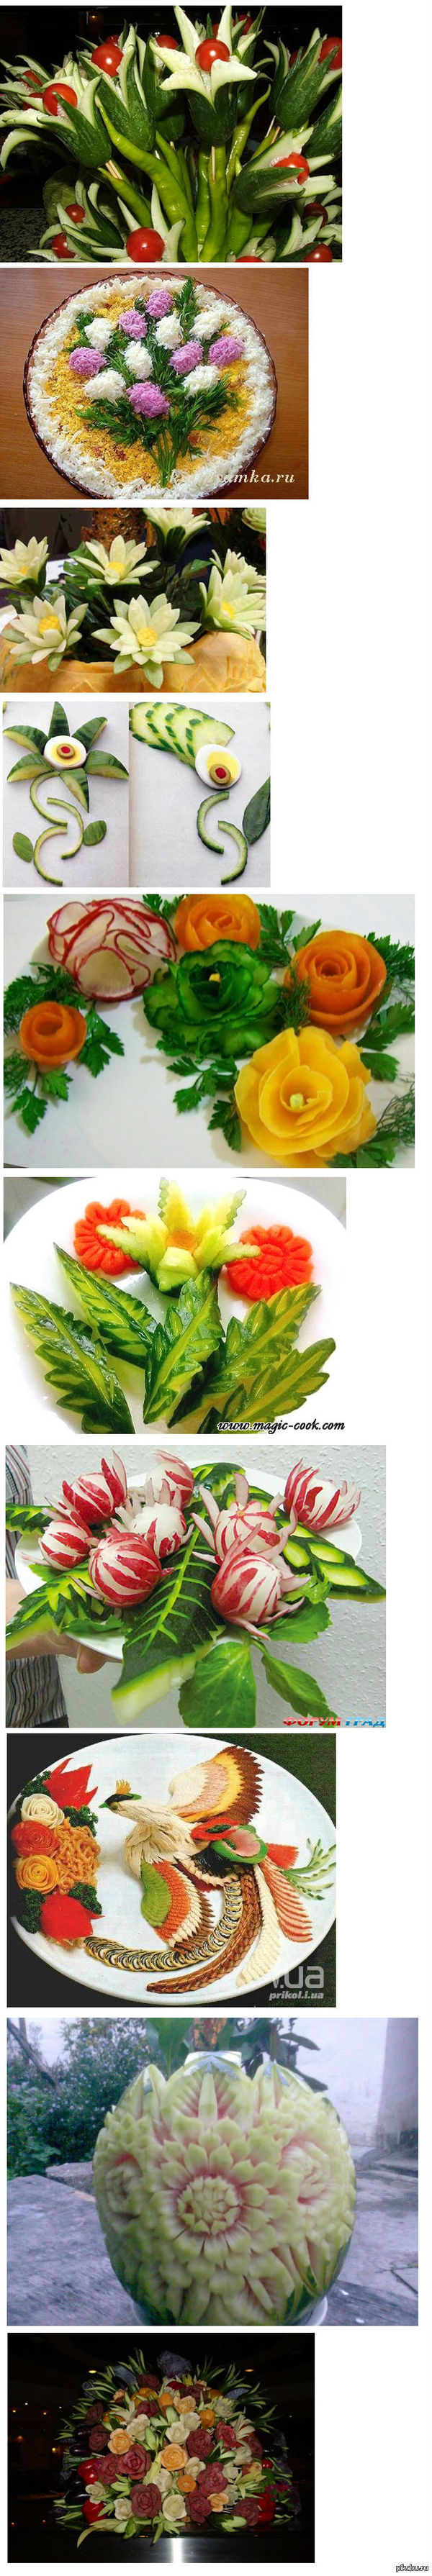 The magic of vegetables - My, My, Vegetables, Crafts, Decoration, Longpost